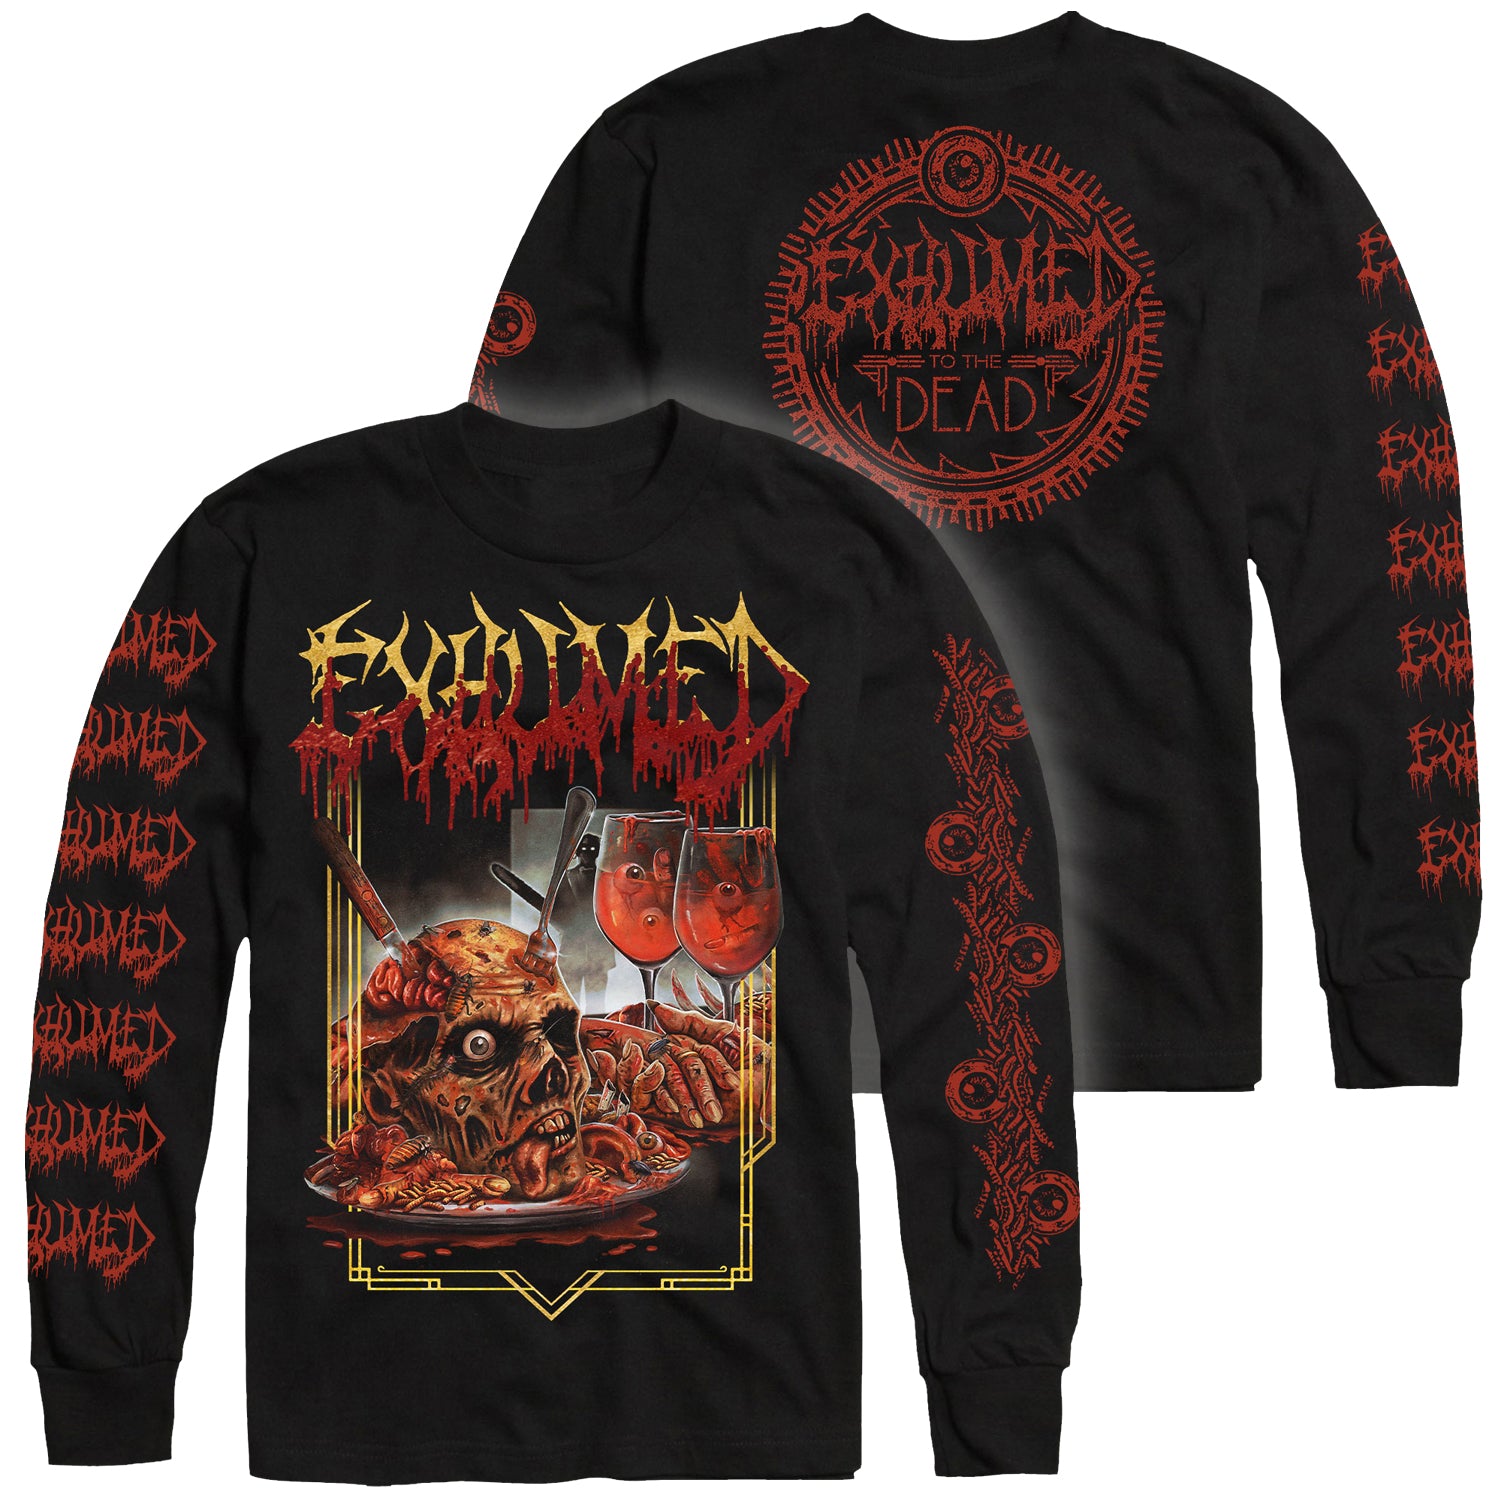 Exhumed "To The Dead" Longsleeve